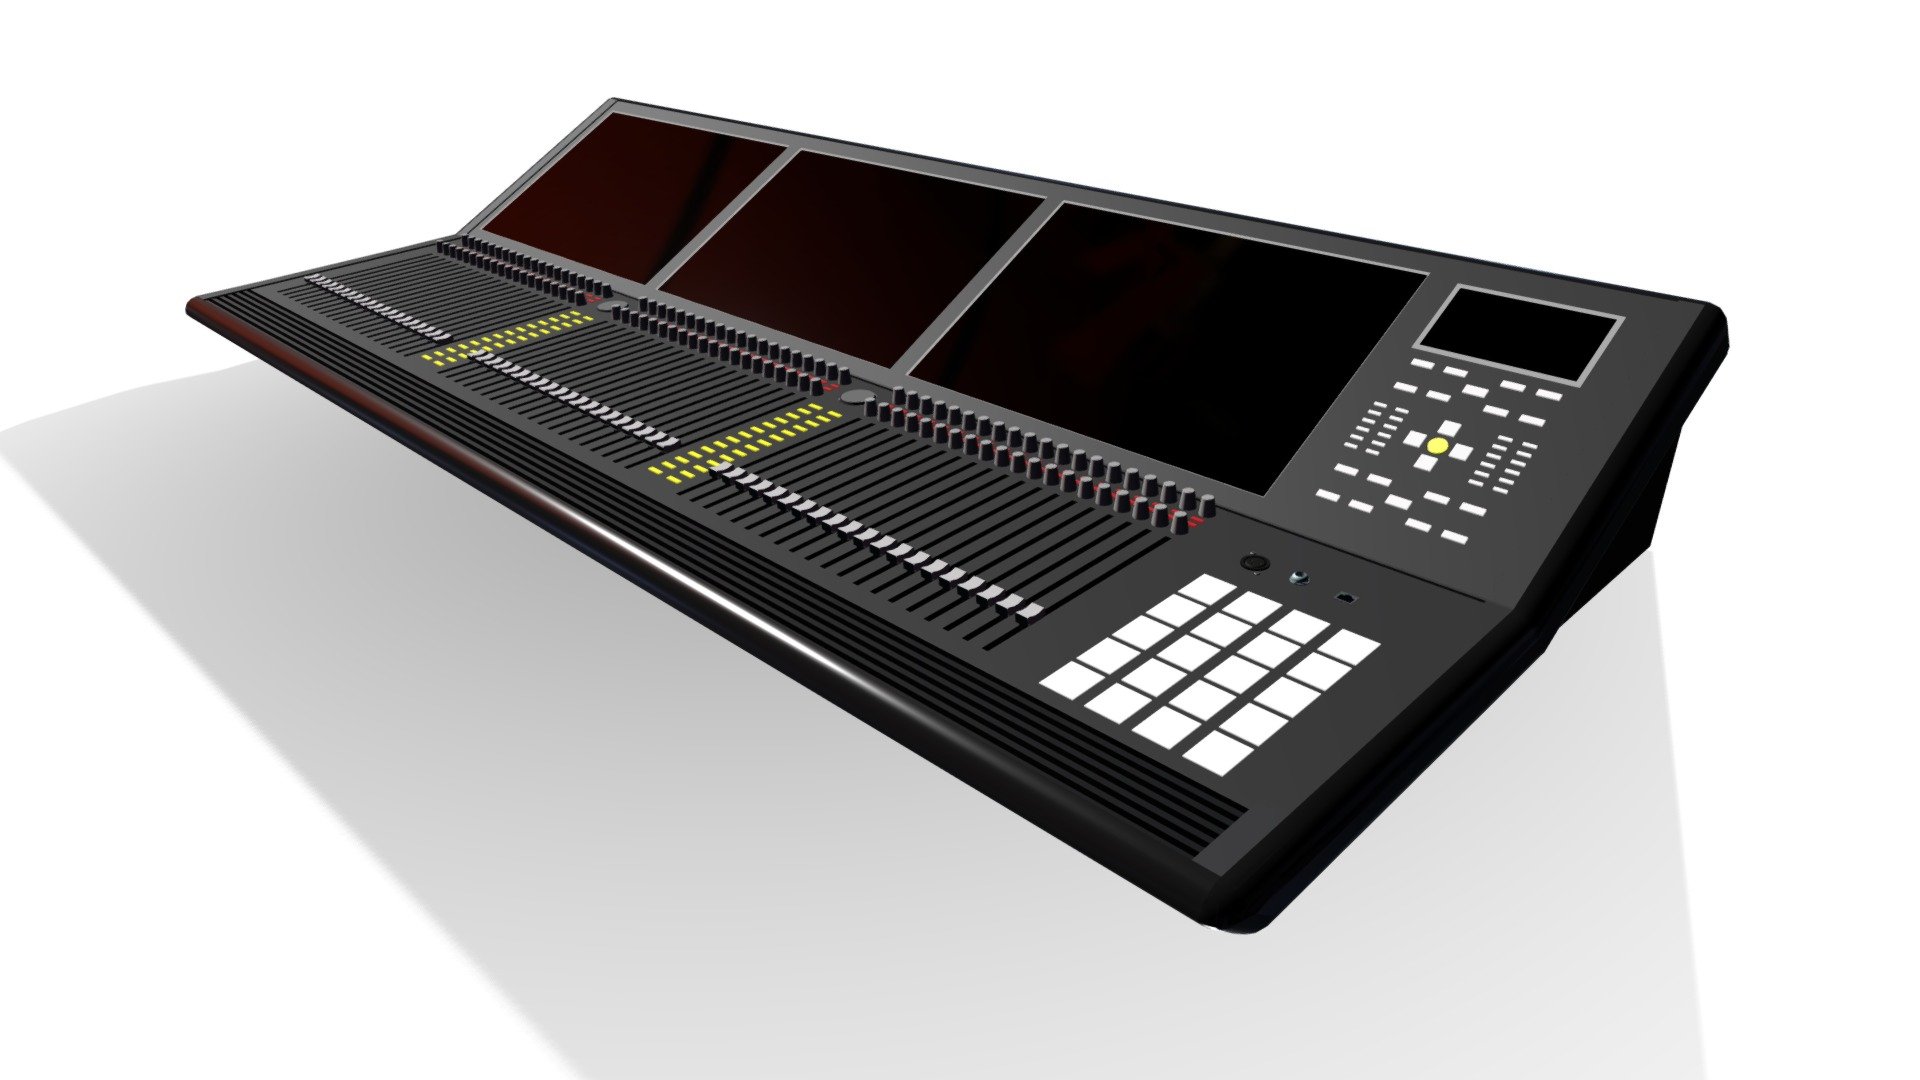 32 Channel ProAudio Mixer
This Block model is a basic representation of an ProAudio Mixer used in studio environments.
All measurements are based on block standard sizing for systems integration design.
Ideal for 2d multi axis layouts and technical specification 3d model